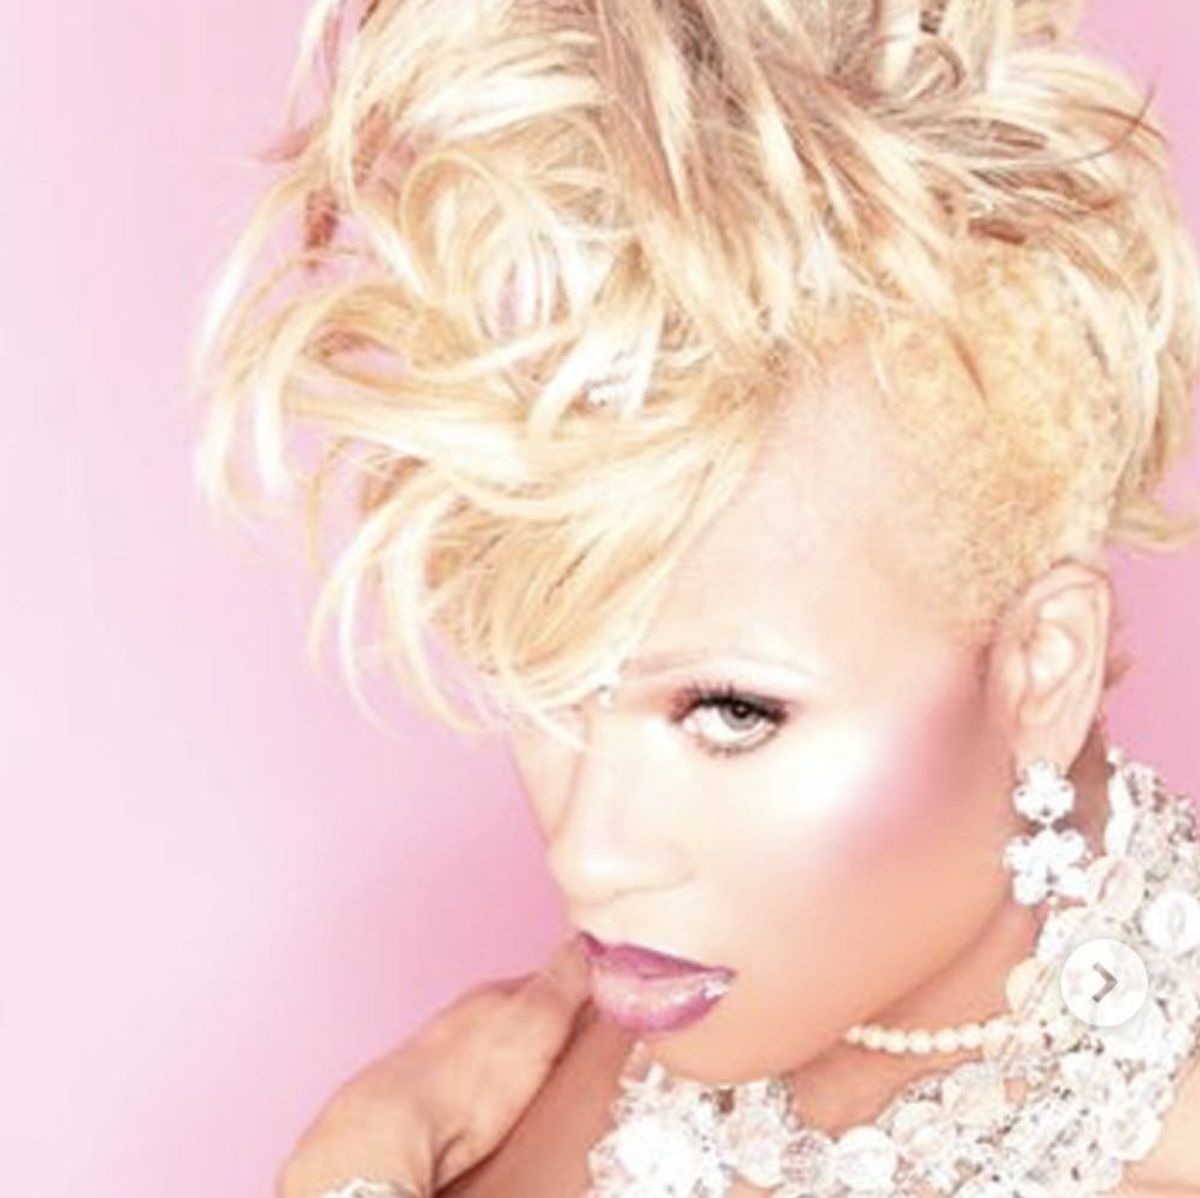 Meet Peppermint, the Groundbreaking New Star of the Transgender Equality Movement